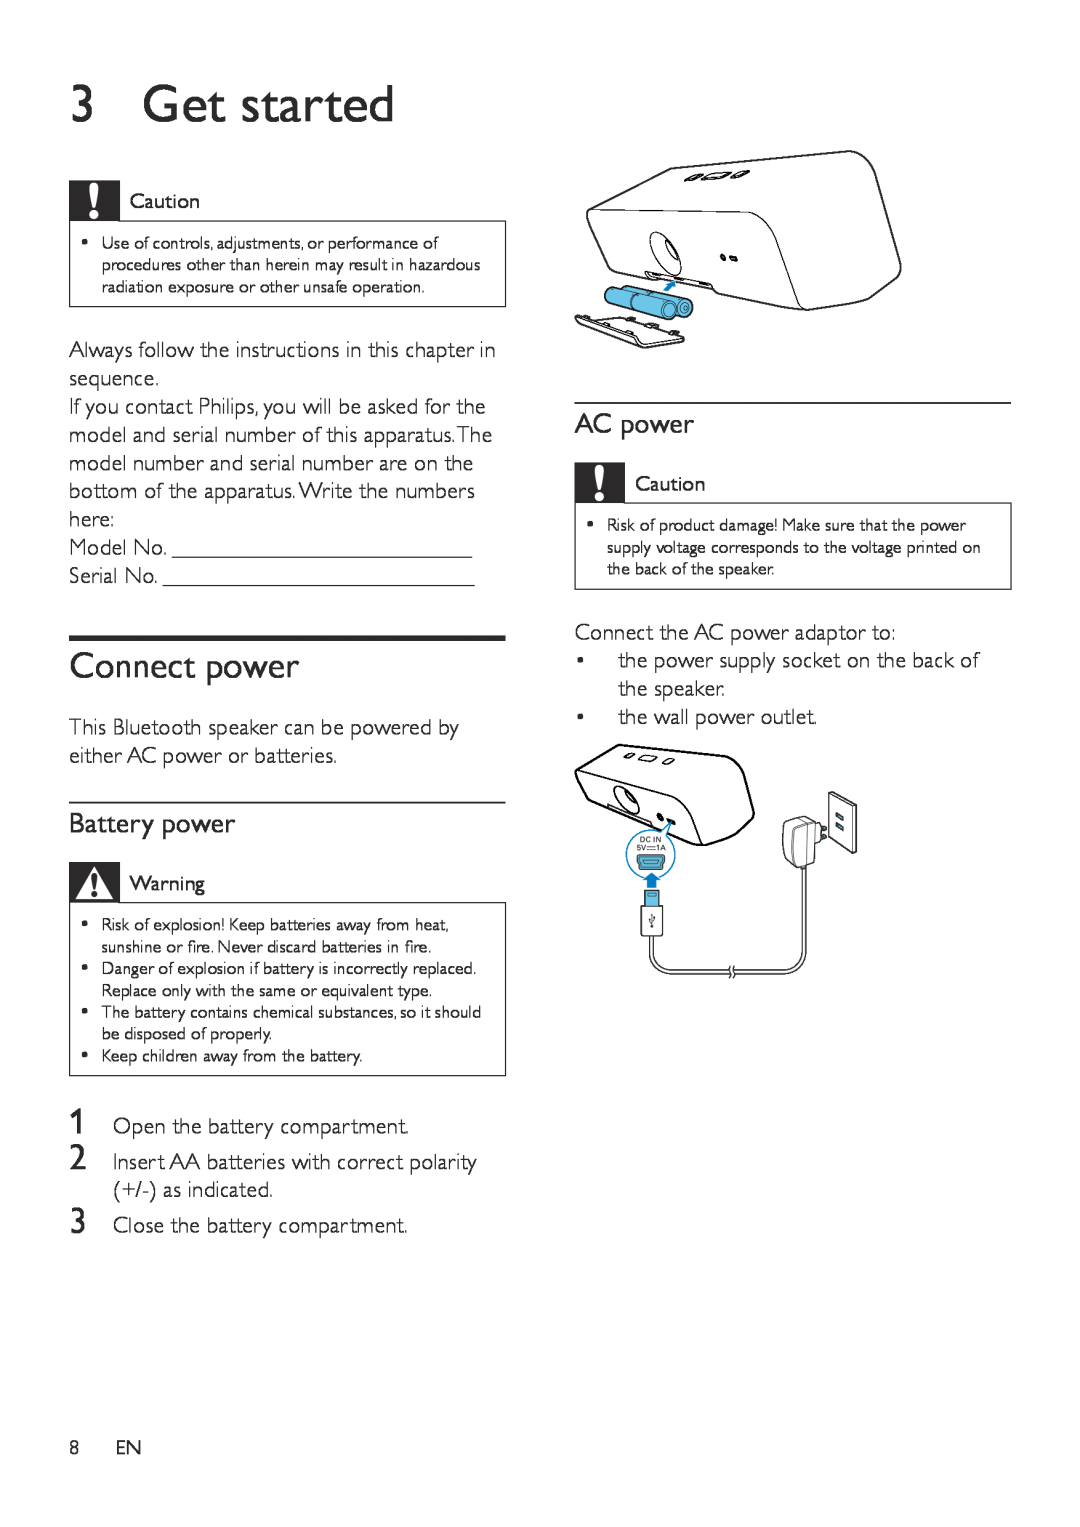 Philips SBT37, SBT310/37 user manual Get started, Connect power, Battery power, AC power 